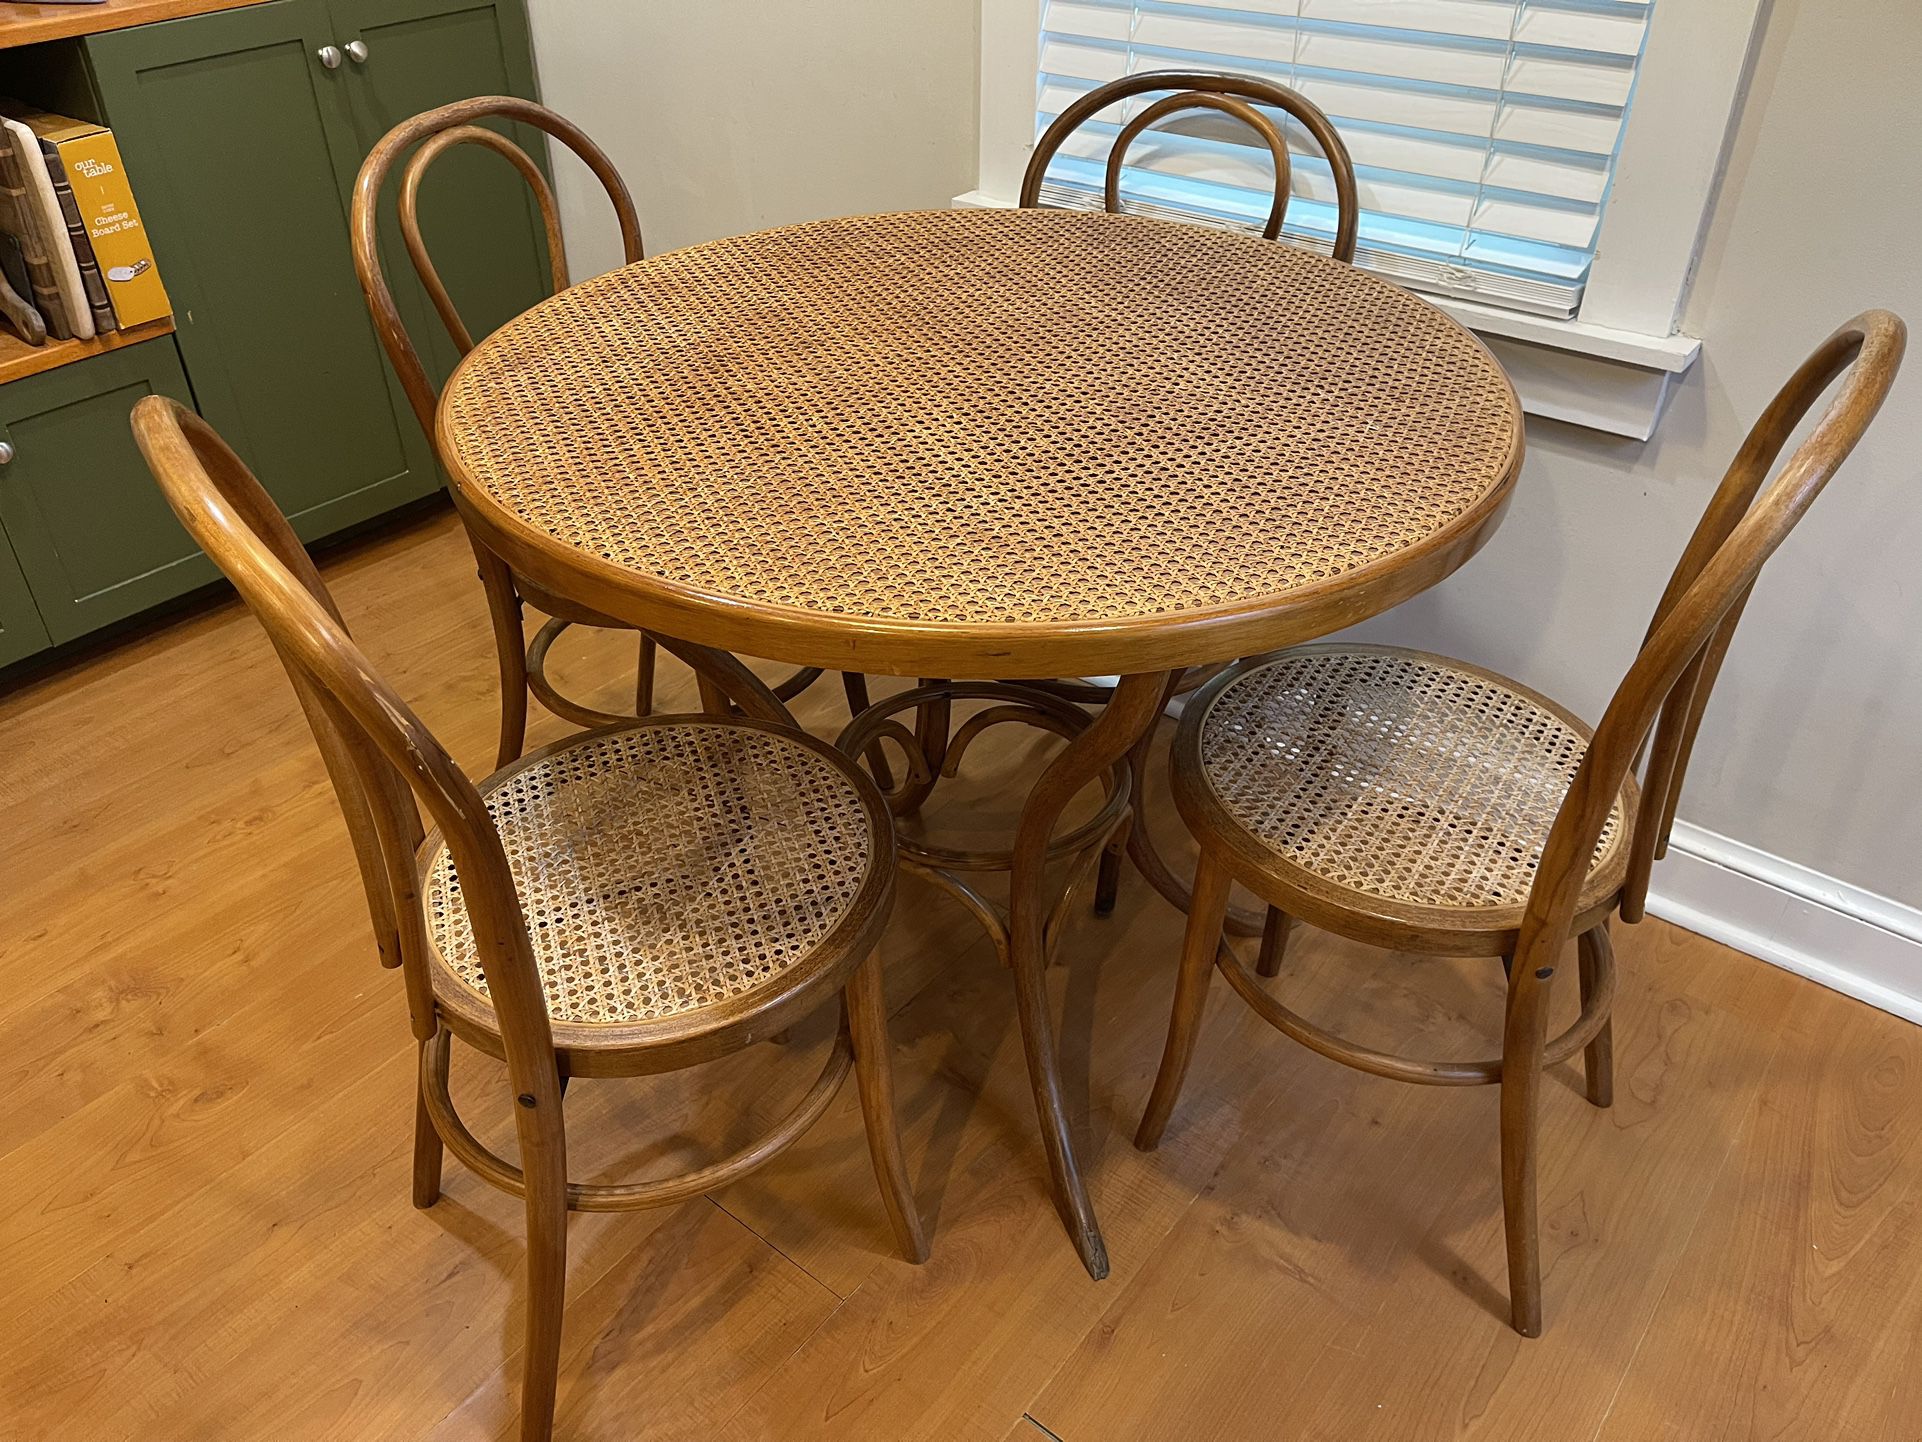 Vintage Bentwood rattan cafe kitchen table and 4 chairs